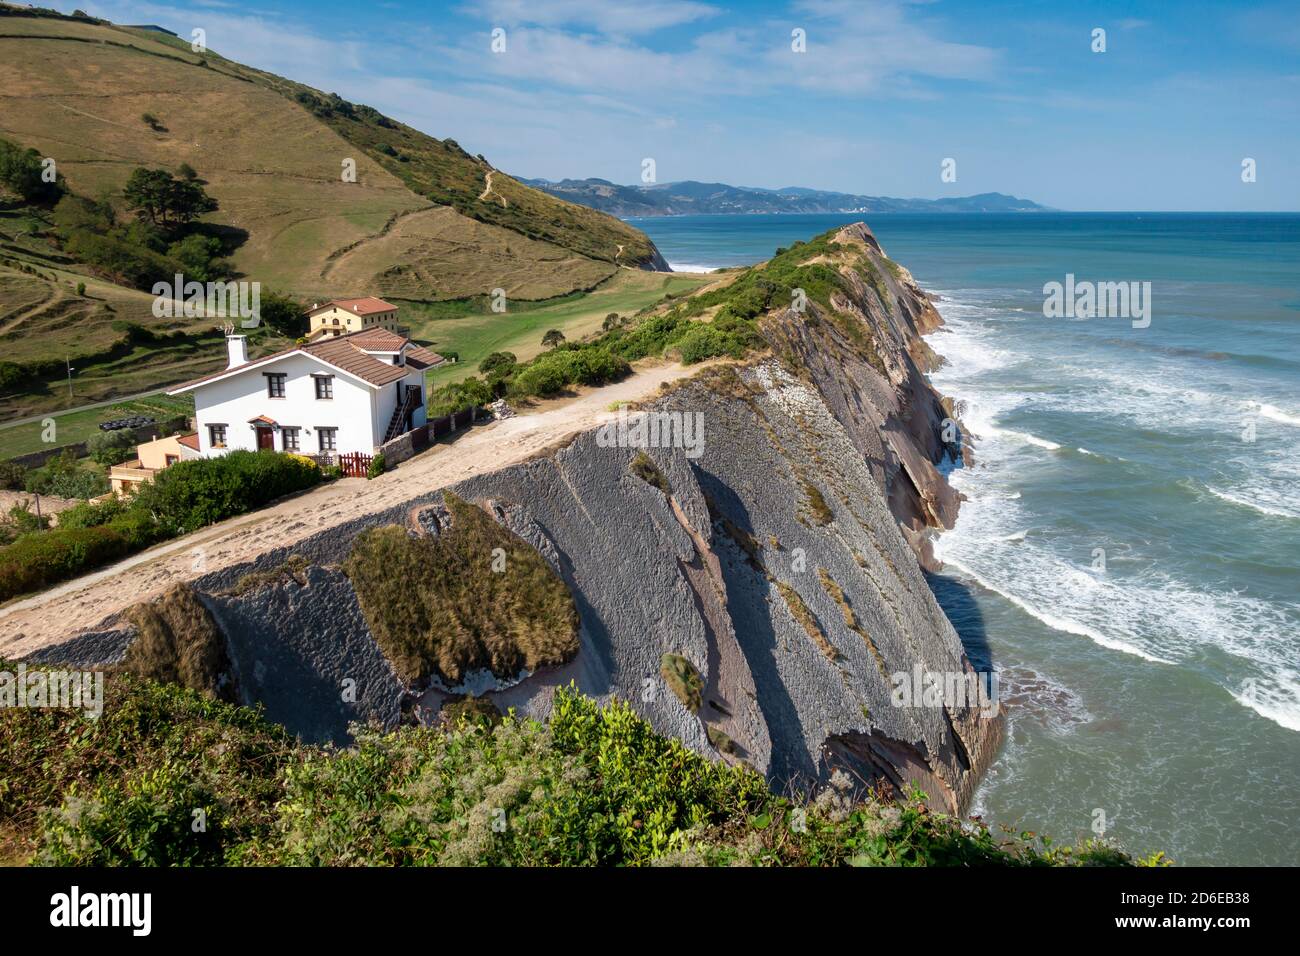 View of basque coast from San Telmo in Zumaia, flysch geological landscape in the Basque Country Stock Photo